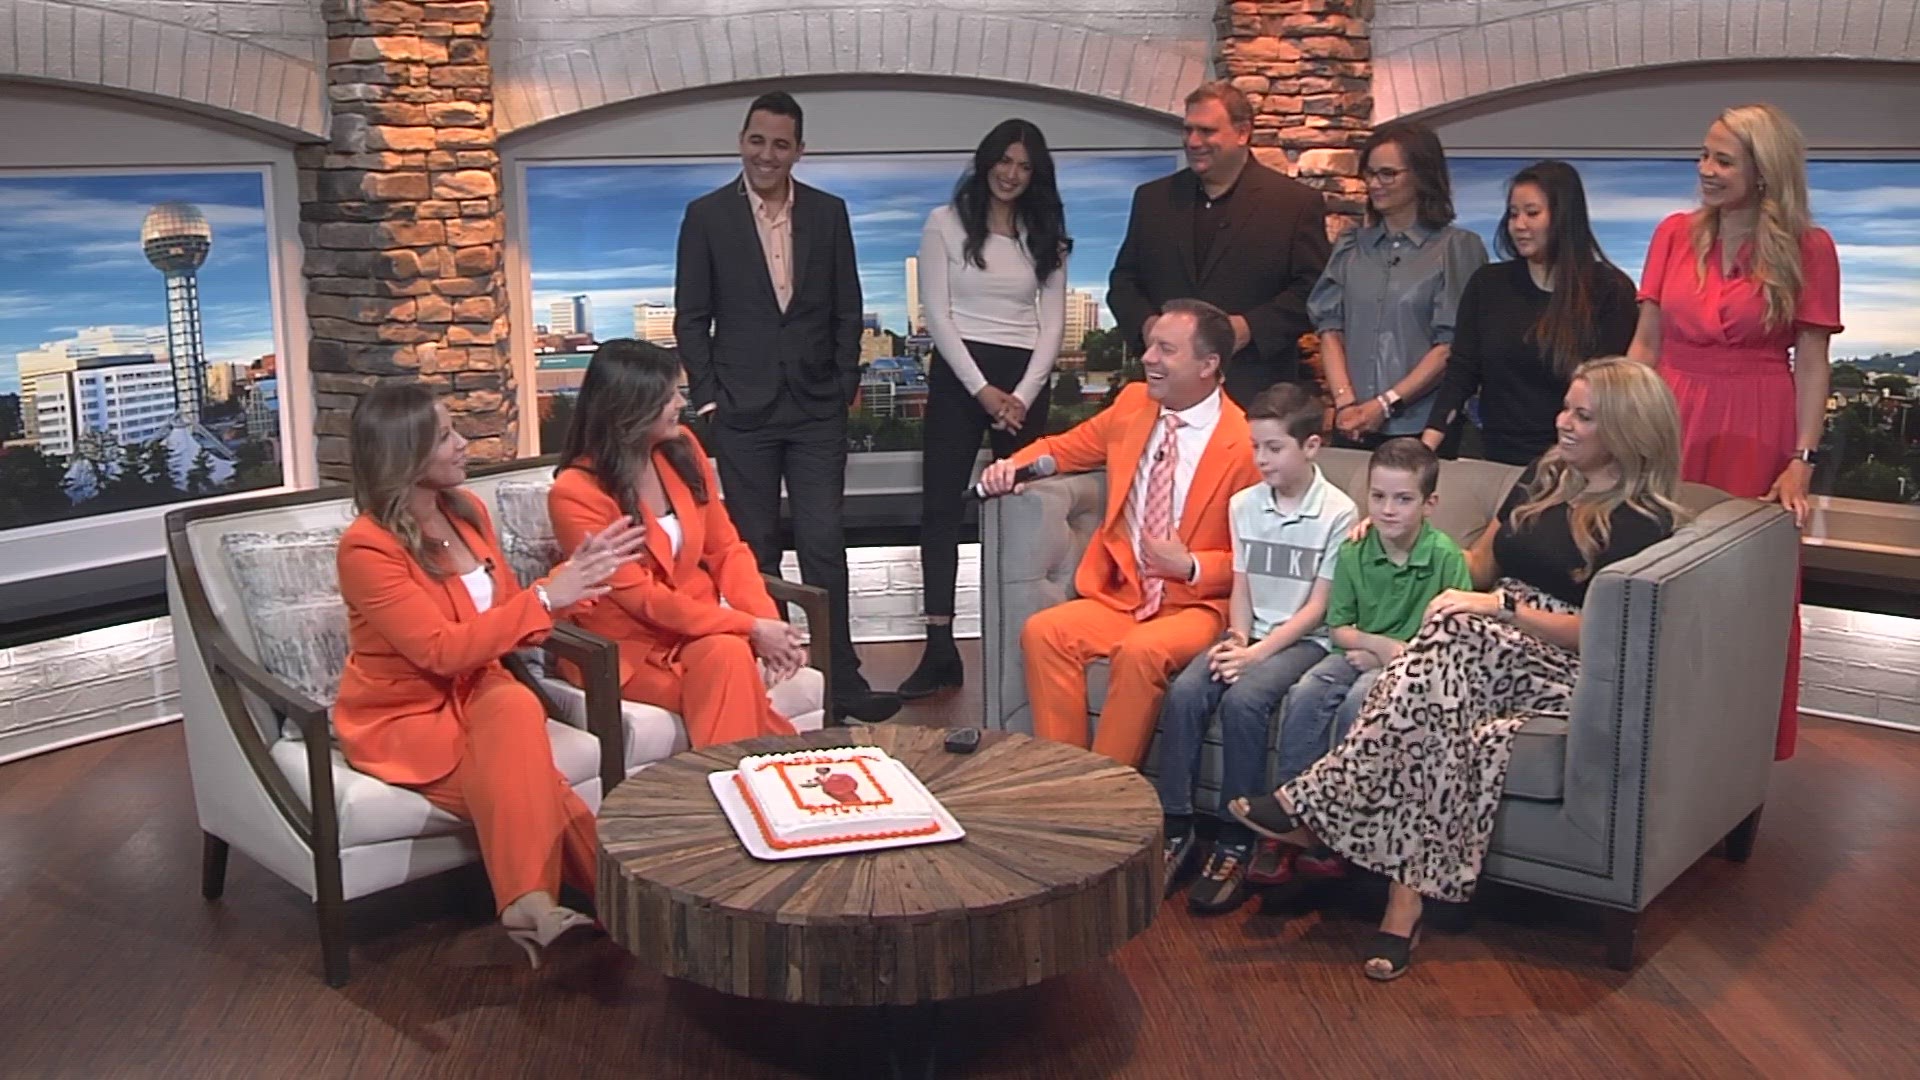 Even Abby and Heather were rocking the orange suit!